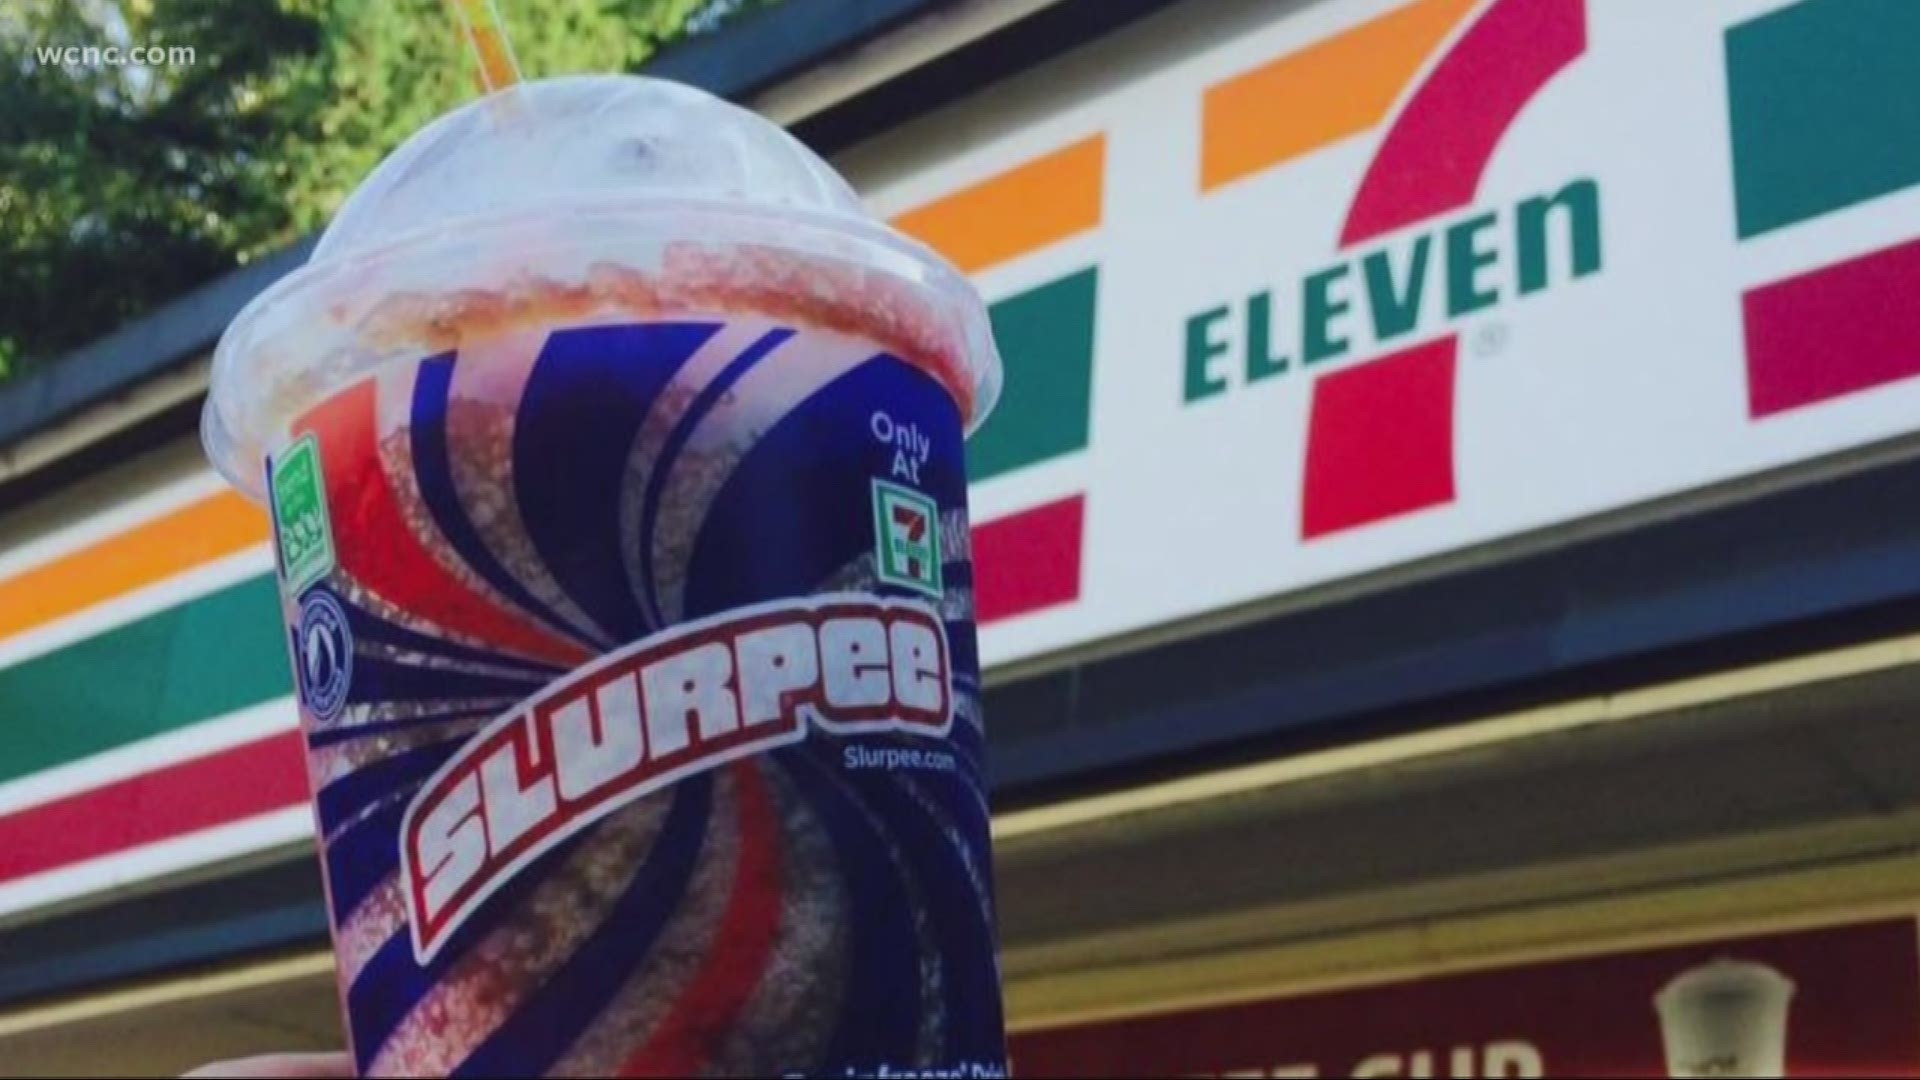 Are you craving a Slurpee but don't have the motivation to go to the store and get it? 7-Eleven has you covered, they just announced a new delivery service at over 2,000 locations nationwide.